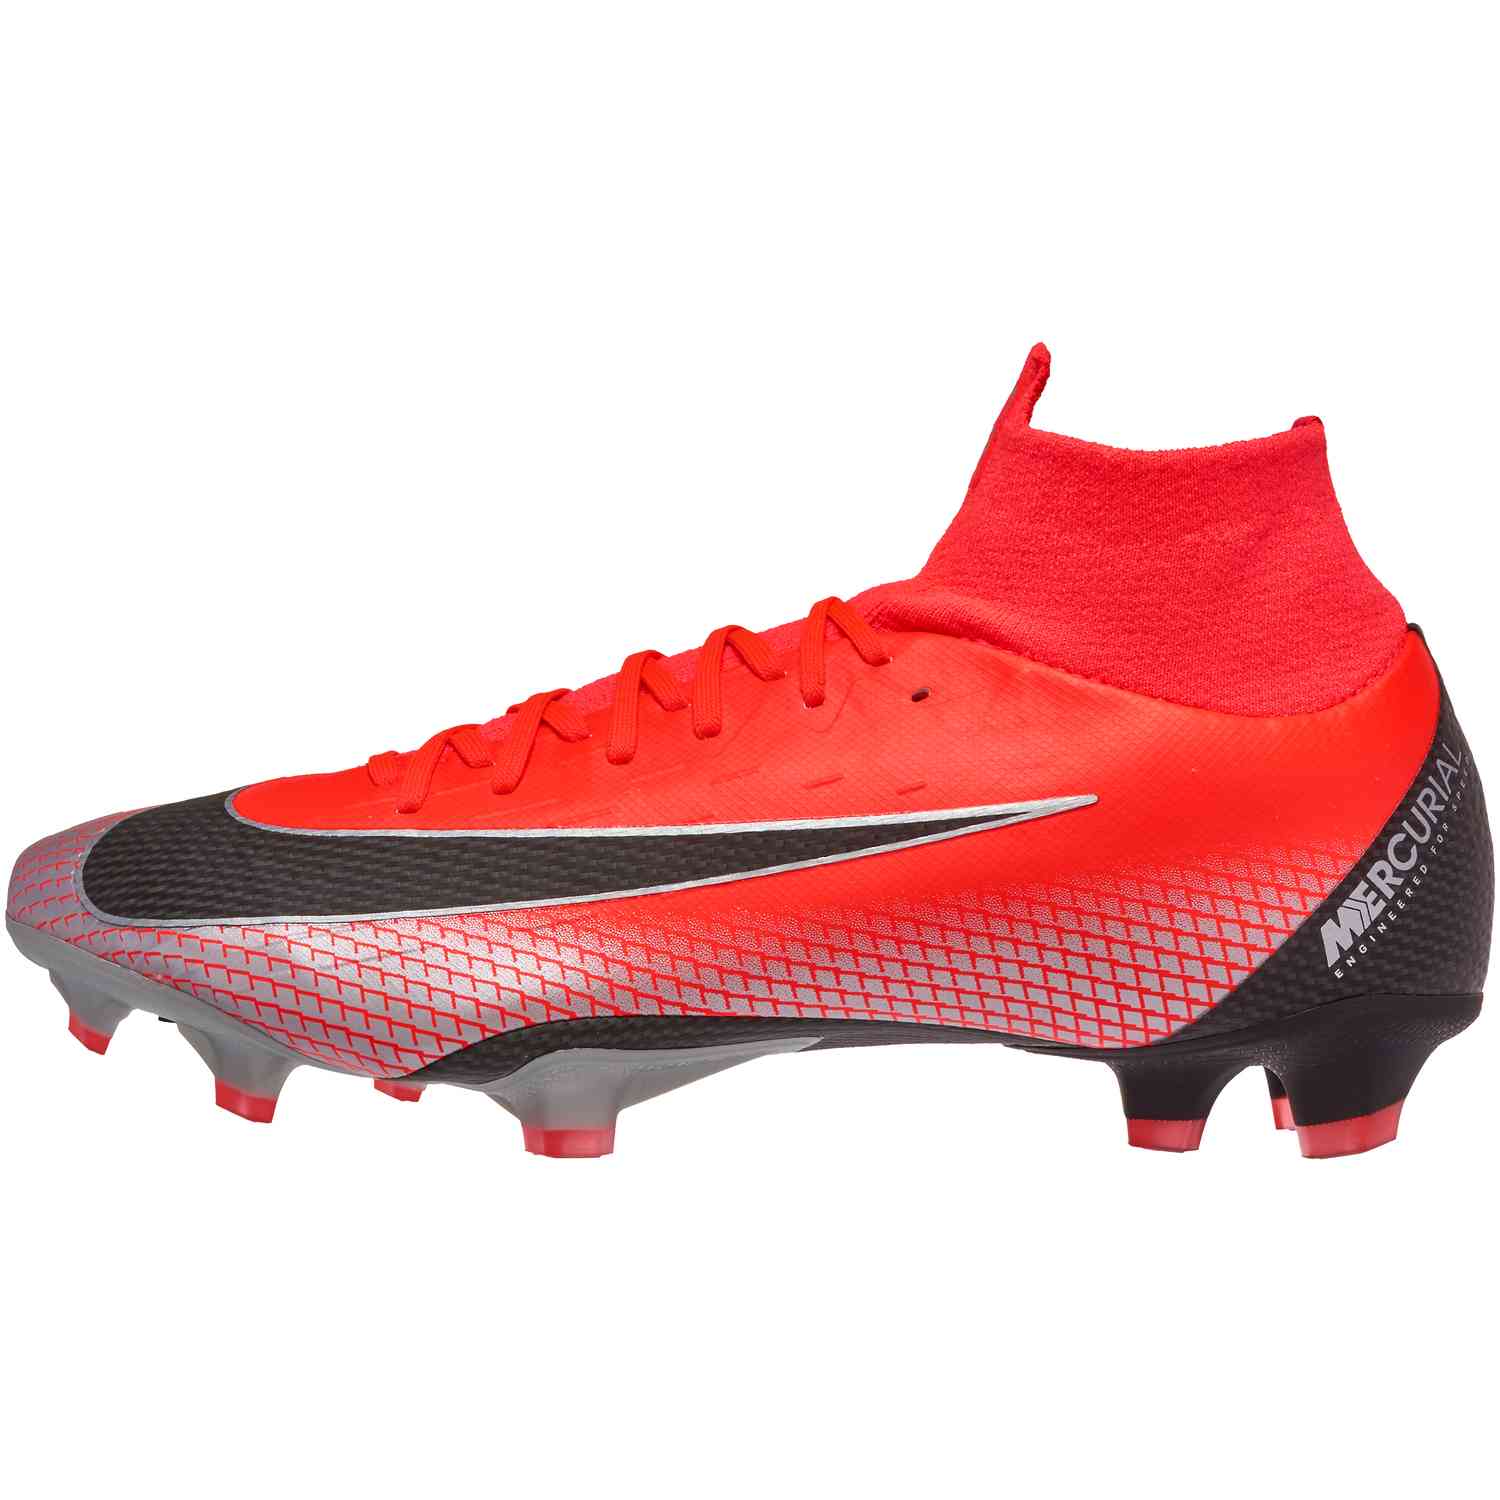 Nike Mercurial Superfly 7 Pro FG Soccer Cleat Laser Crimson.